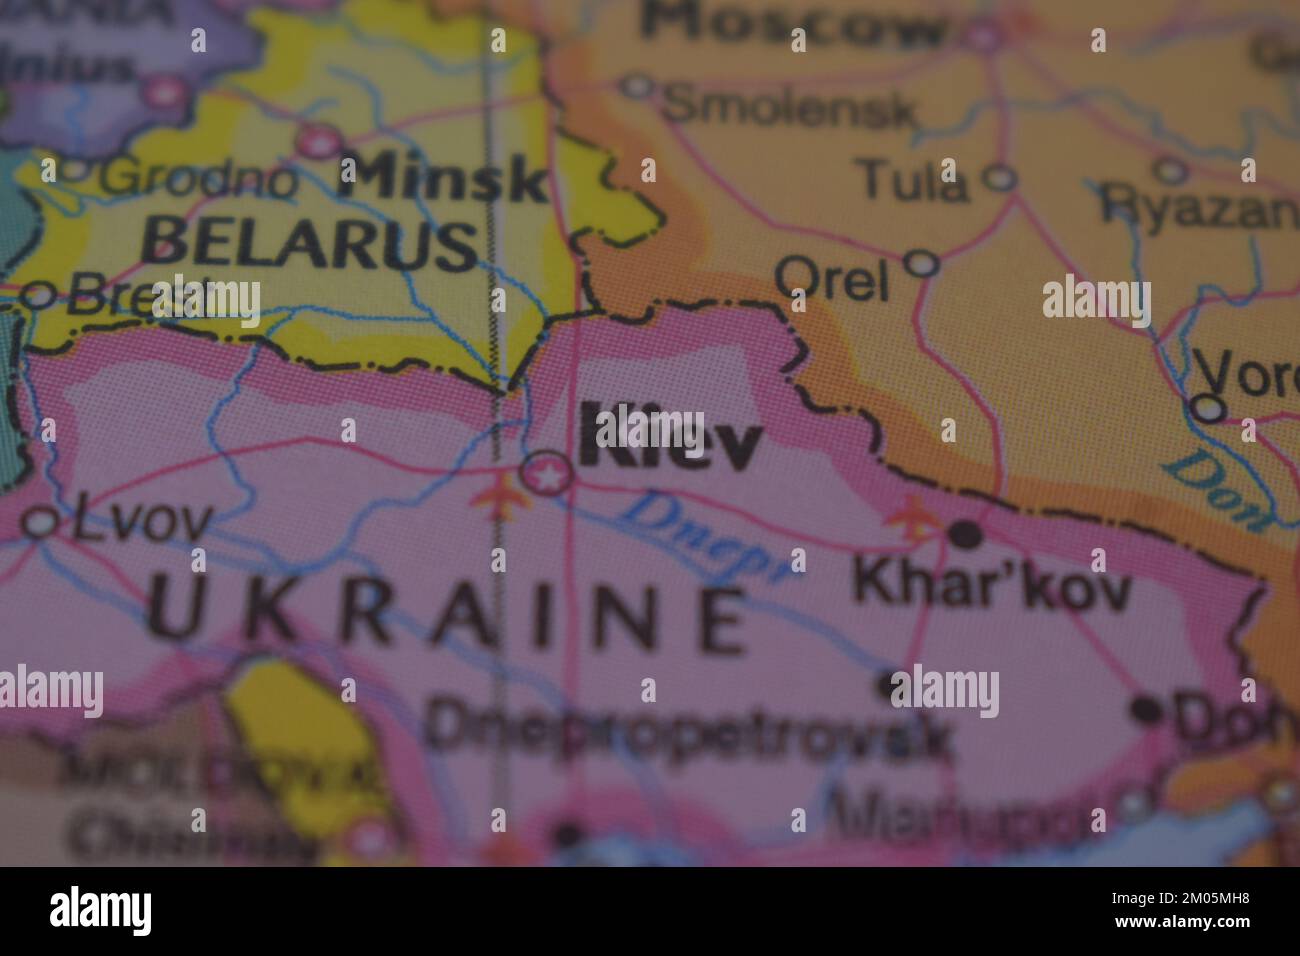 Kiev Country Name On The Political World Map Very Macro Close-Up View Stock Photo